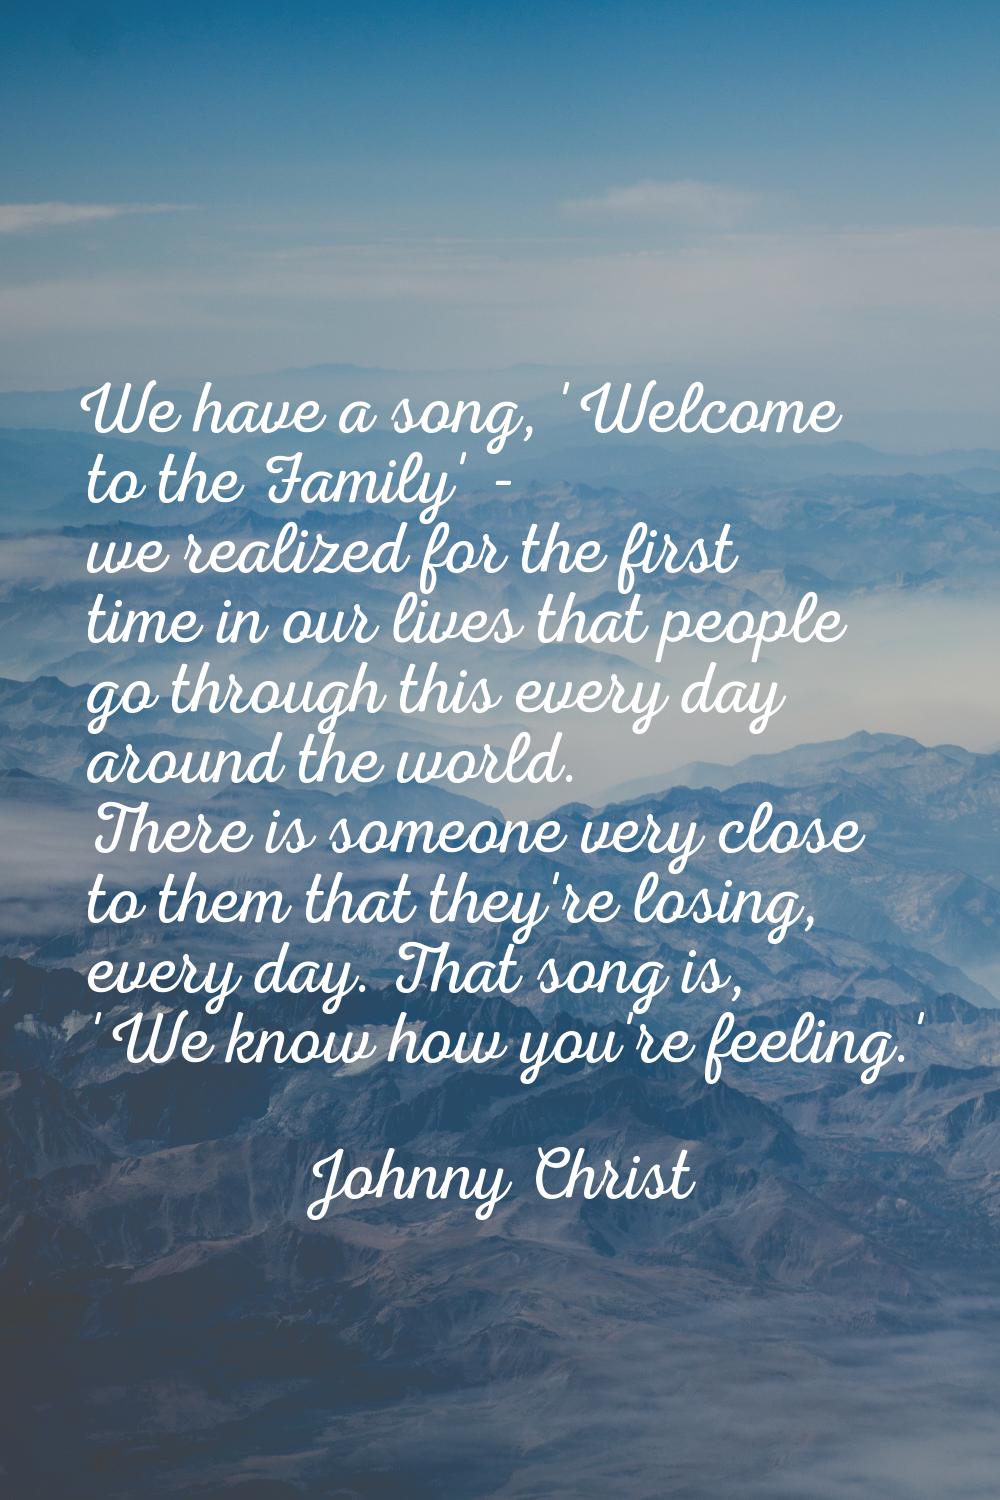 We have a song, 'Welcome to the Family' - we realized for the first time in our lives that people g